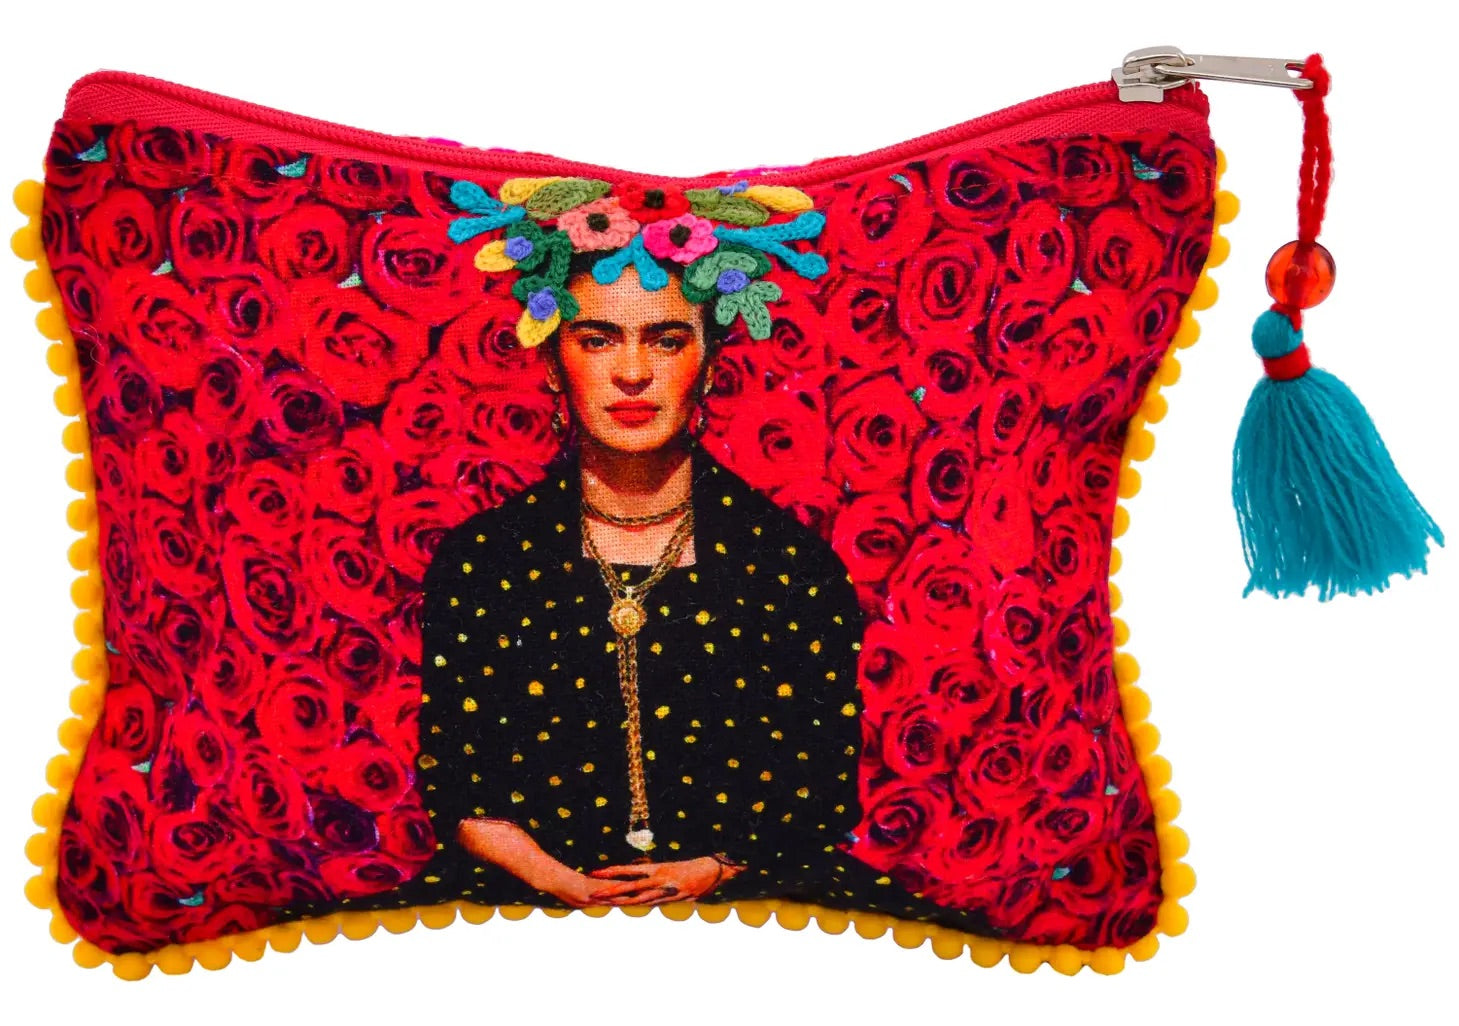 Red roses purse designs embroidered with the image of Mexican artist Frida Kahlo in the center dressed with black outfit and yellow dots